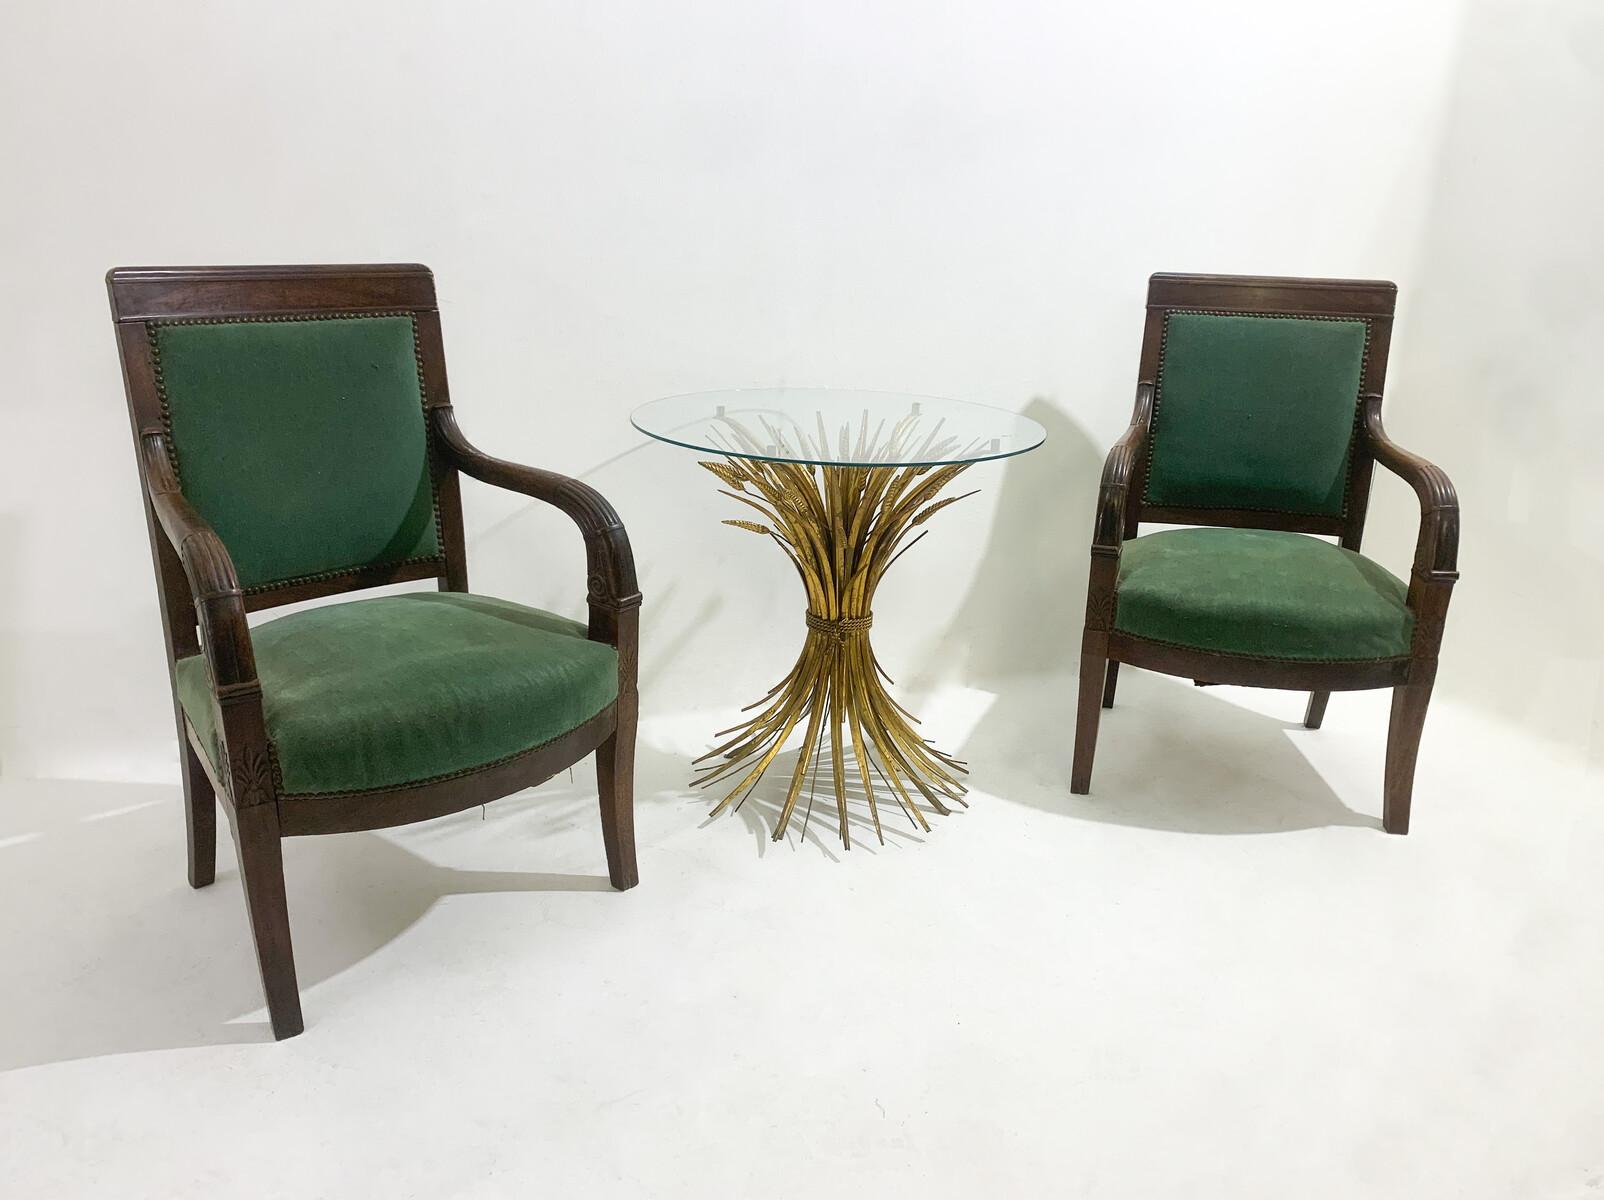 Pair of Green Armchairs, Empire, Mahogany, 19th Century For Sale 1